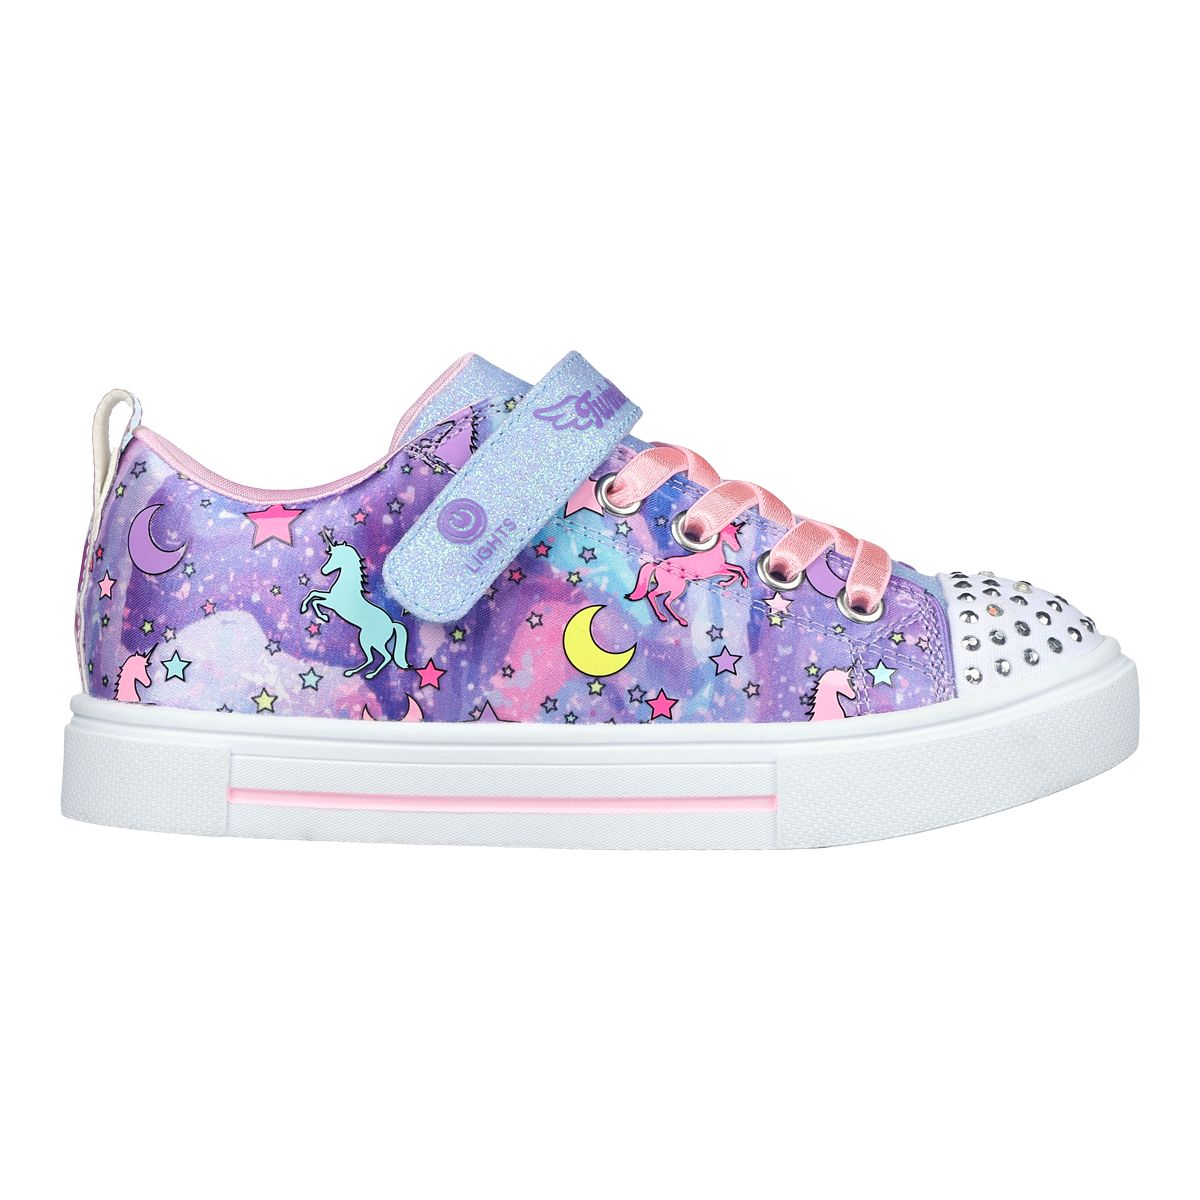 Image of Skechers Girls' Twinkle Toes Twinkle Sparks - Unicorn Dreaming Shoes Stretch Laces Rhinestone